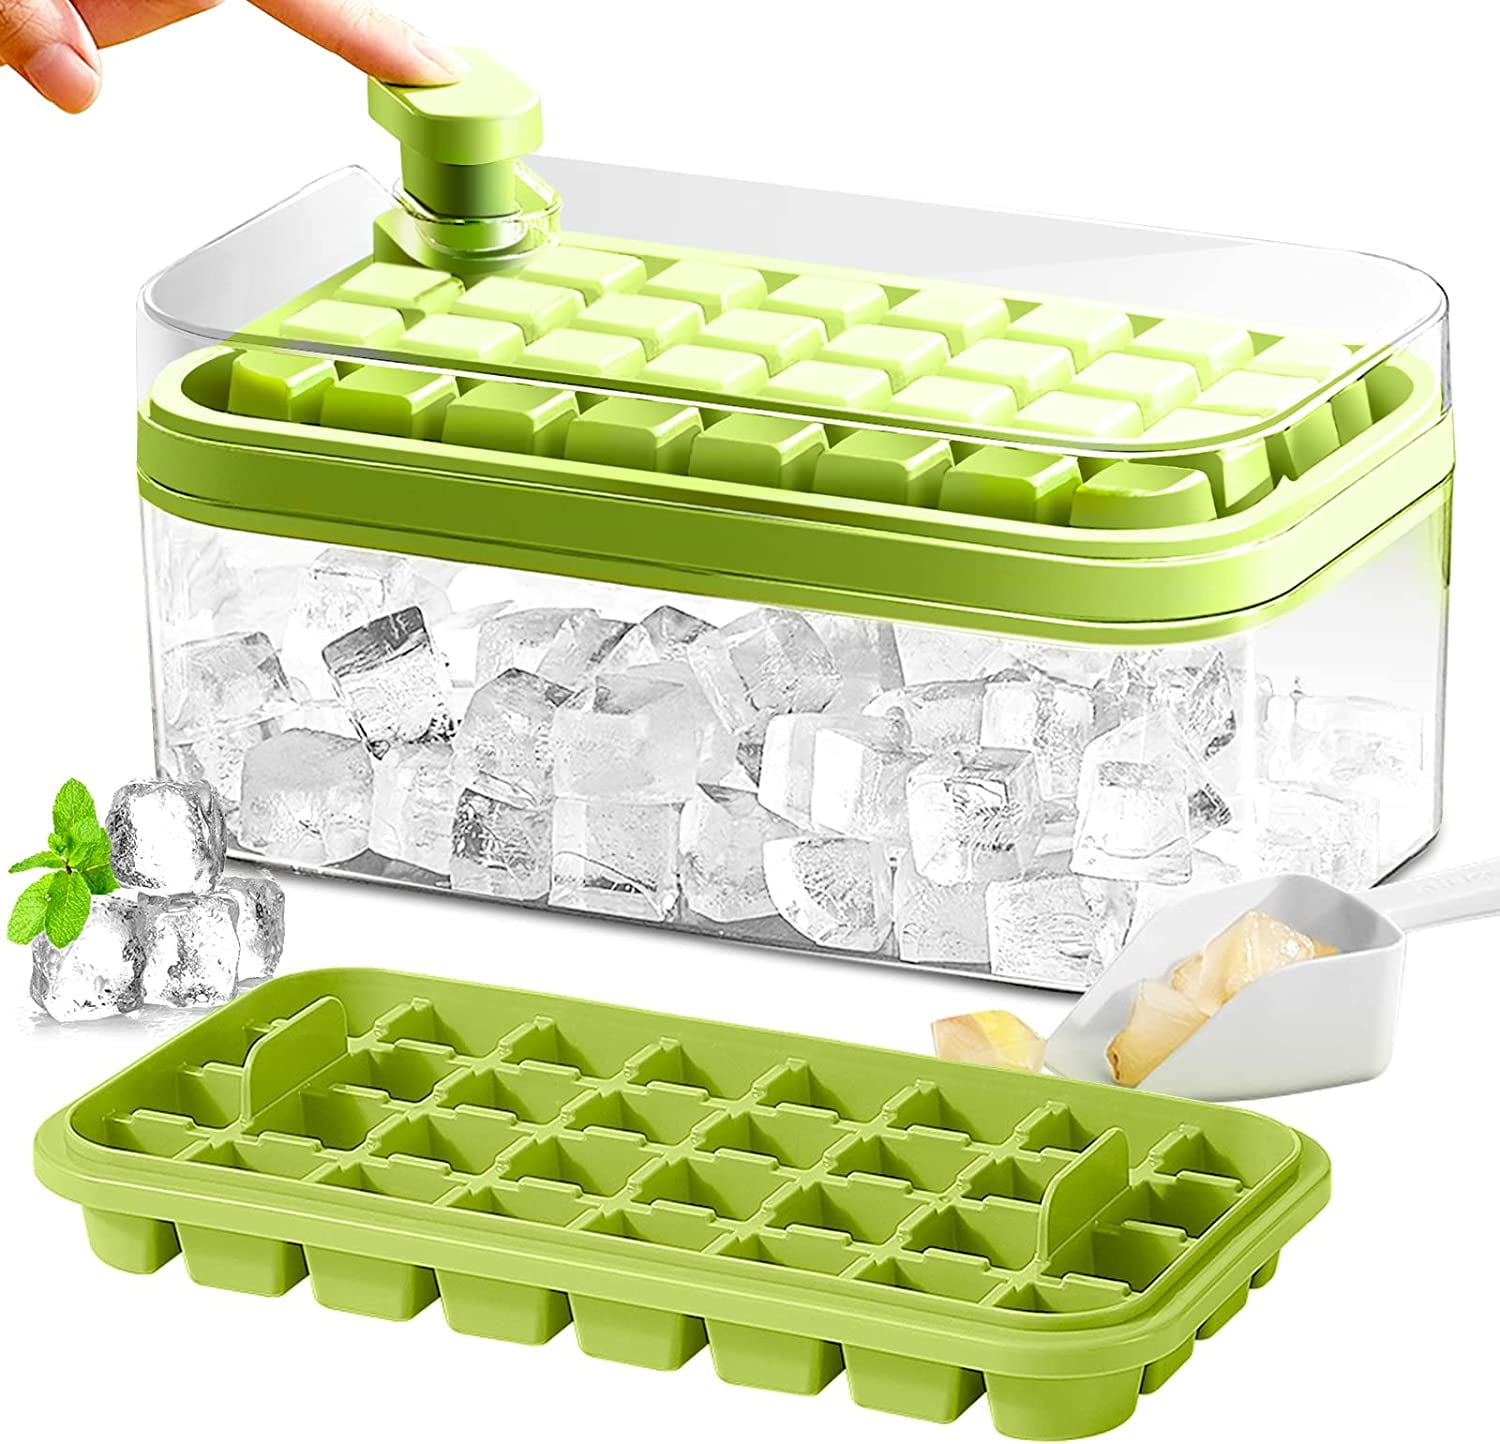  Tovolo Perfect Cube Ice Tray Set of 2 (Candy Apple